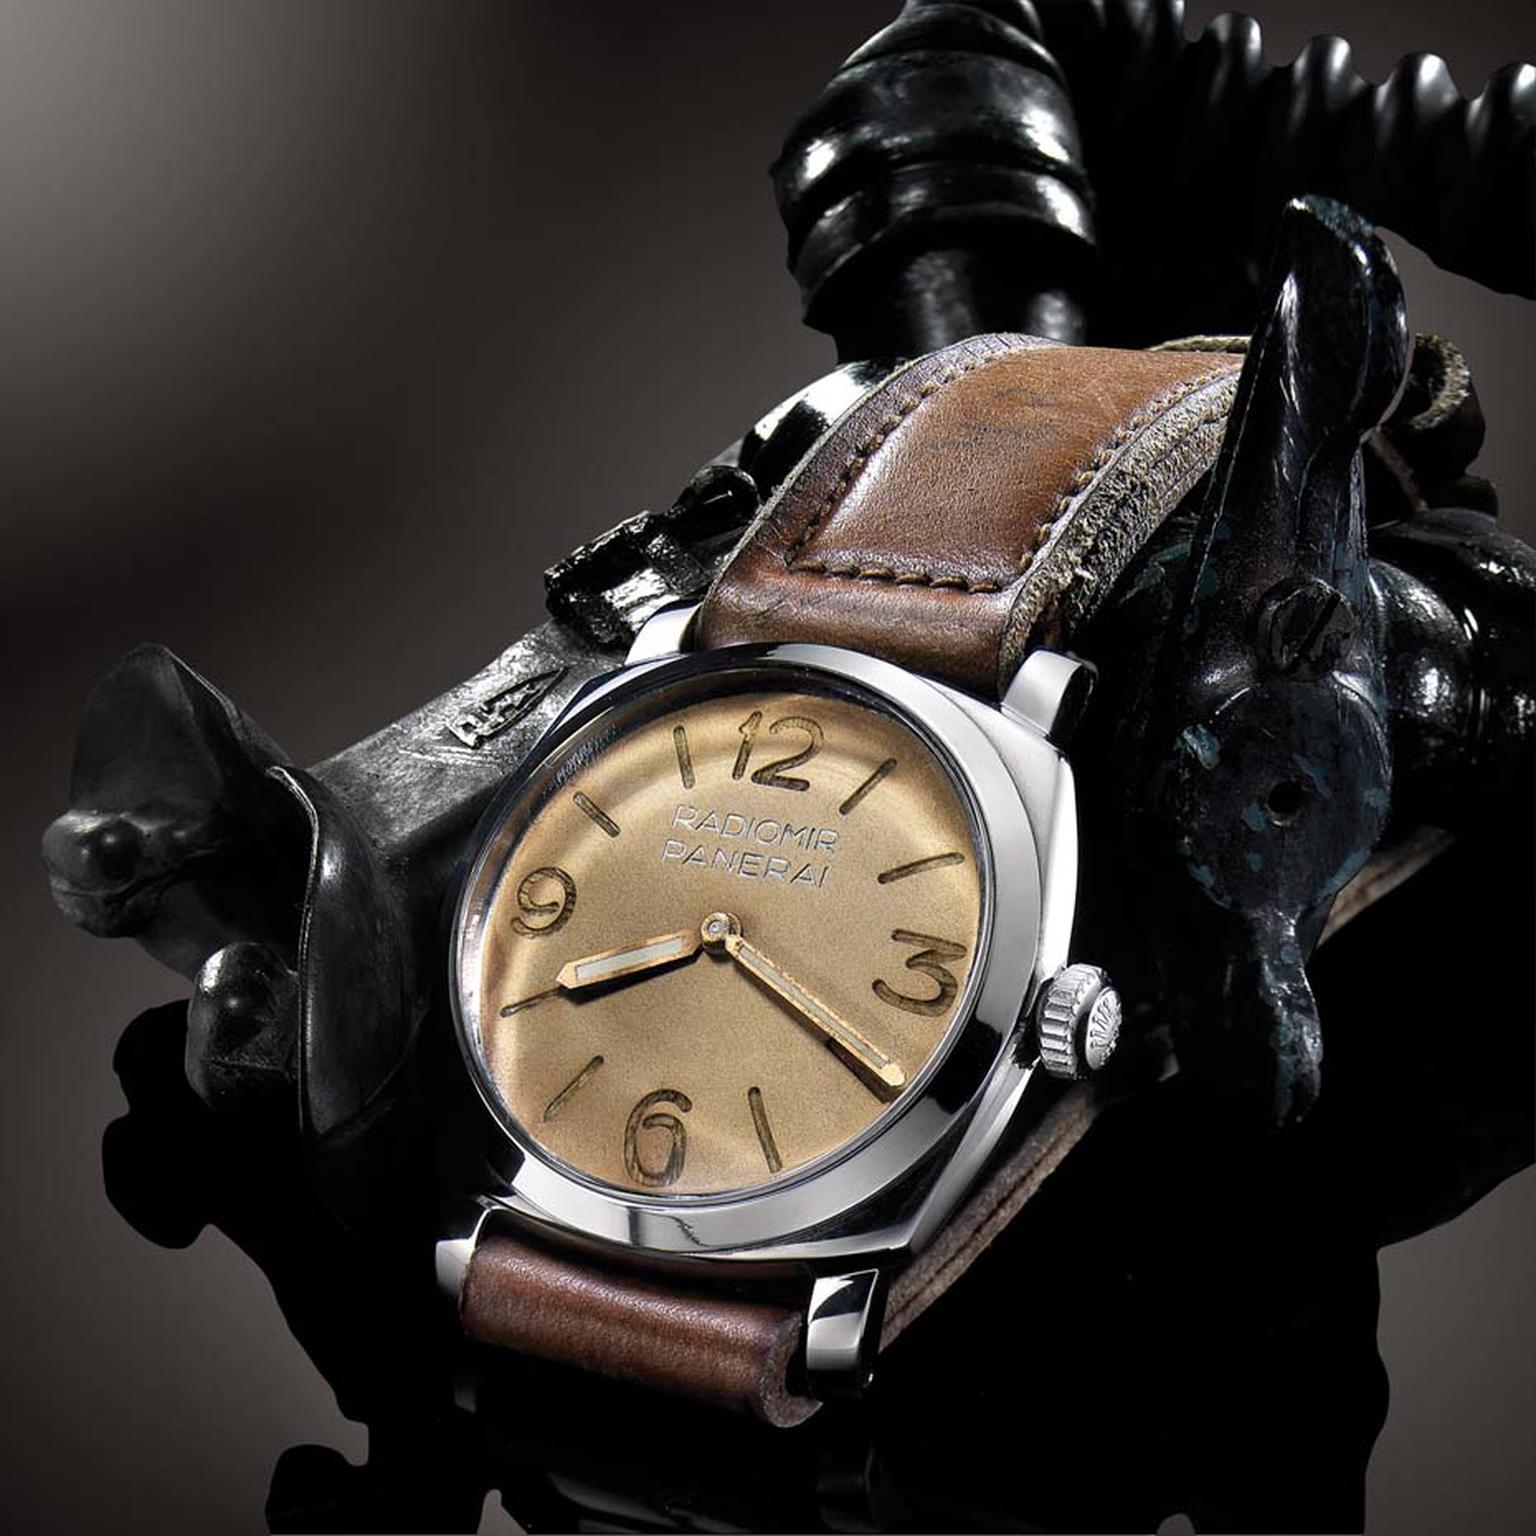 Featuring a Radiomir dial and Rolex 618 17-jewel movement, only 36 Panerai 6154's were produced. It is known among collectors as the Piccolo Egiziano and has an estimated value of £300,000.